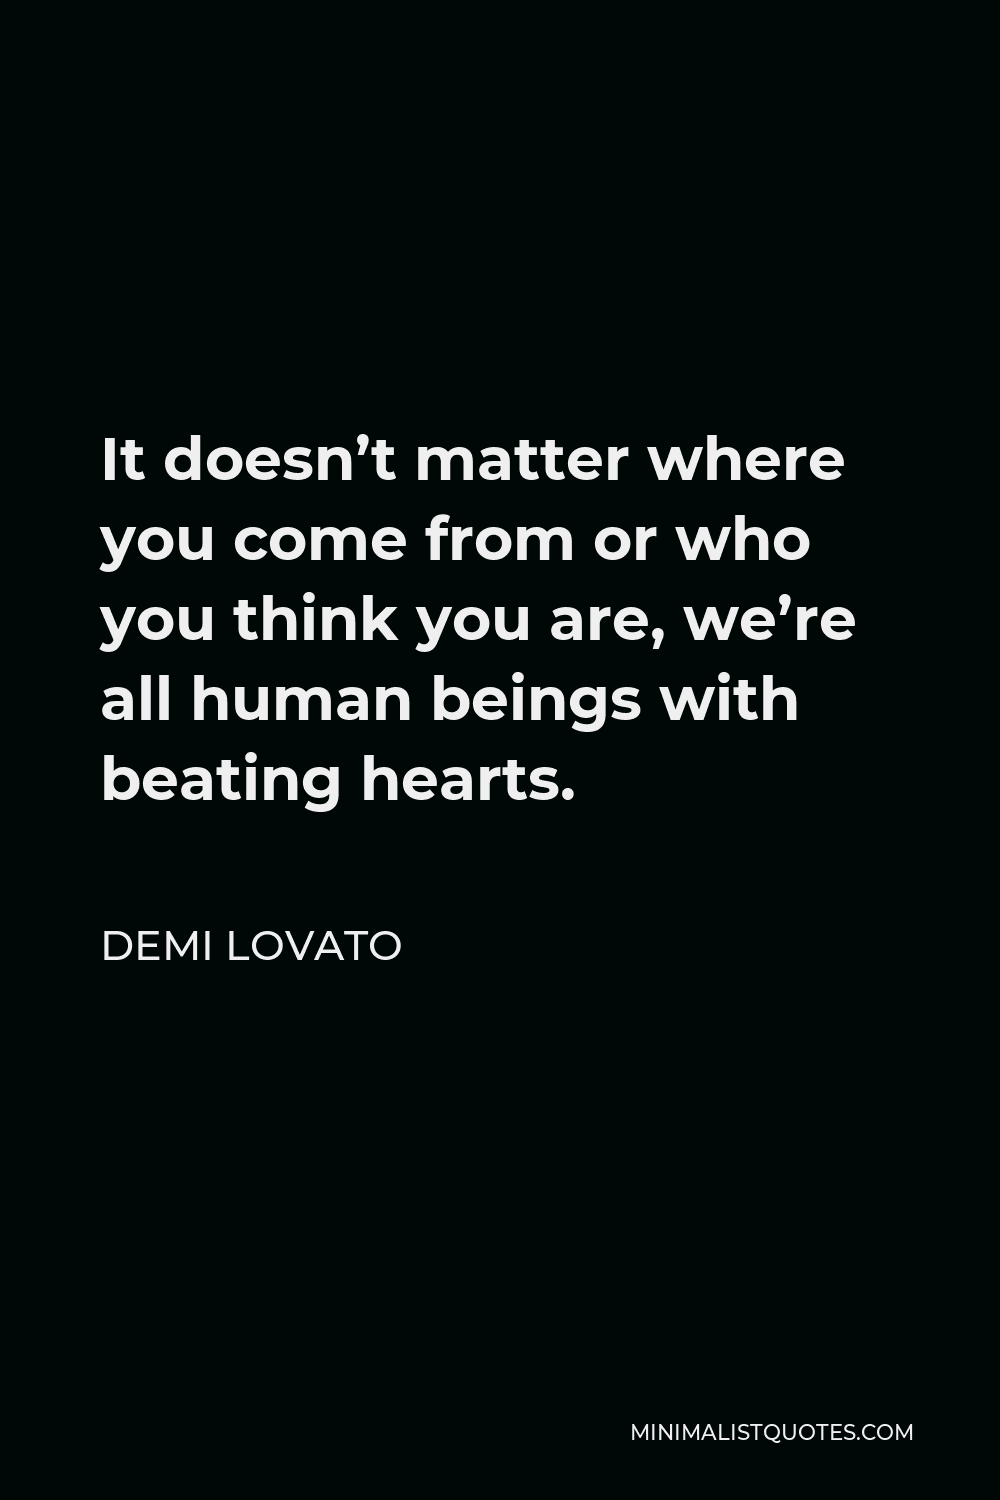 Demi Lovato Quote - It doesn’t matter where you come from or who you think you are, we’re all human beings with beating hearts.